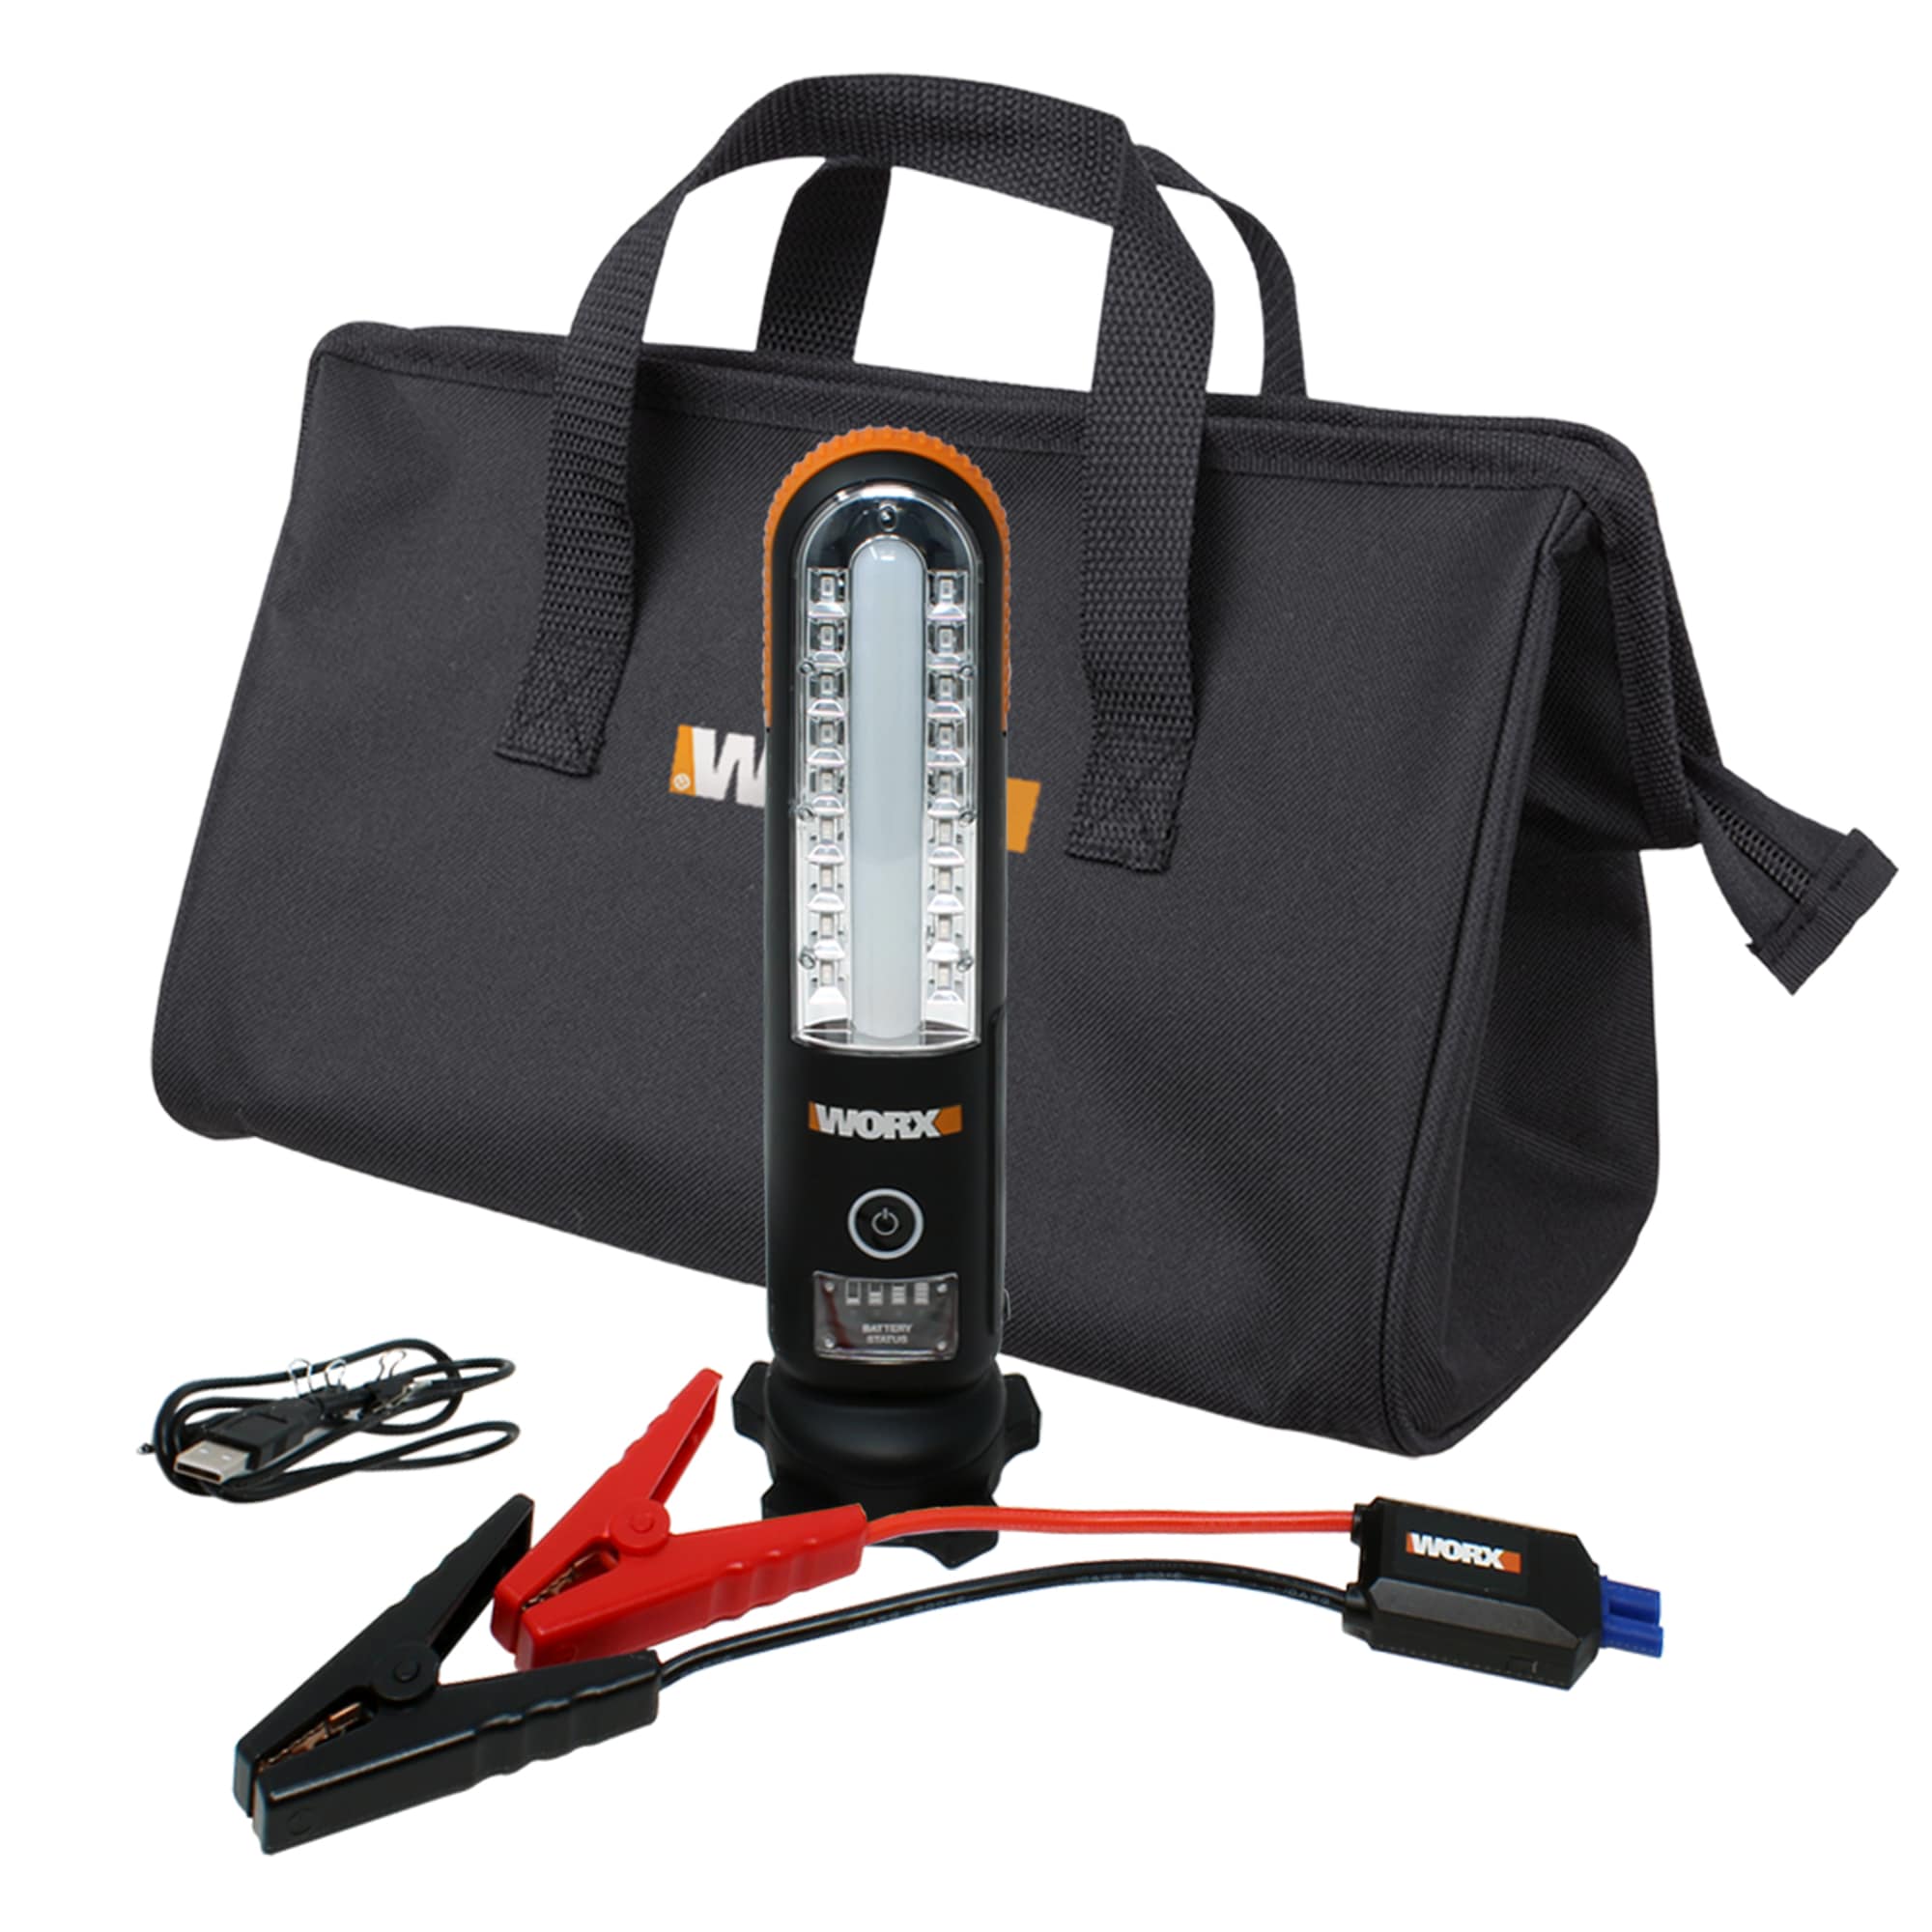 12V Car Jump Starter Multi-Function Emergency Tool with Sos Lamp